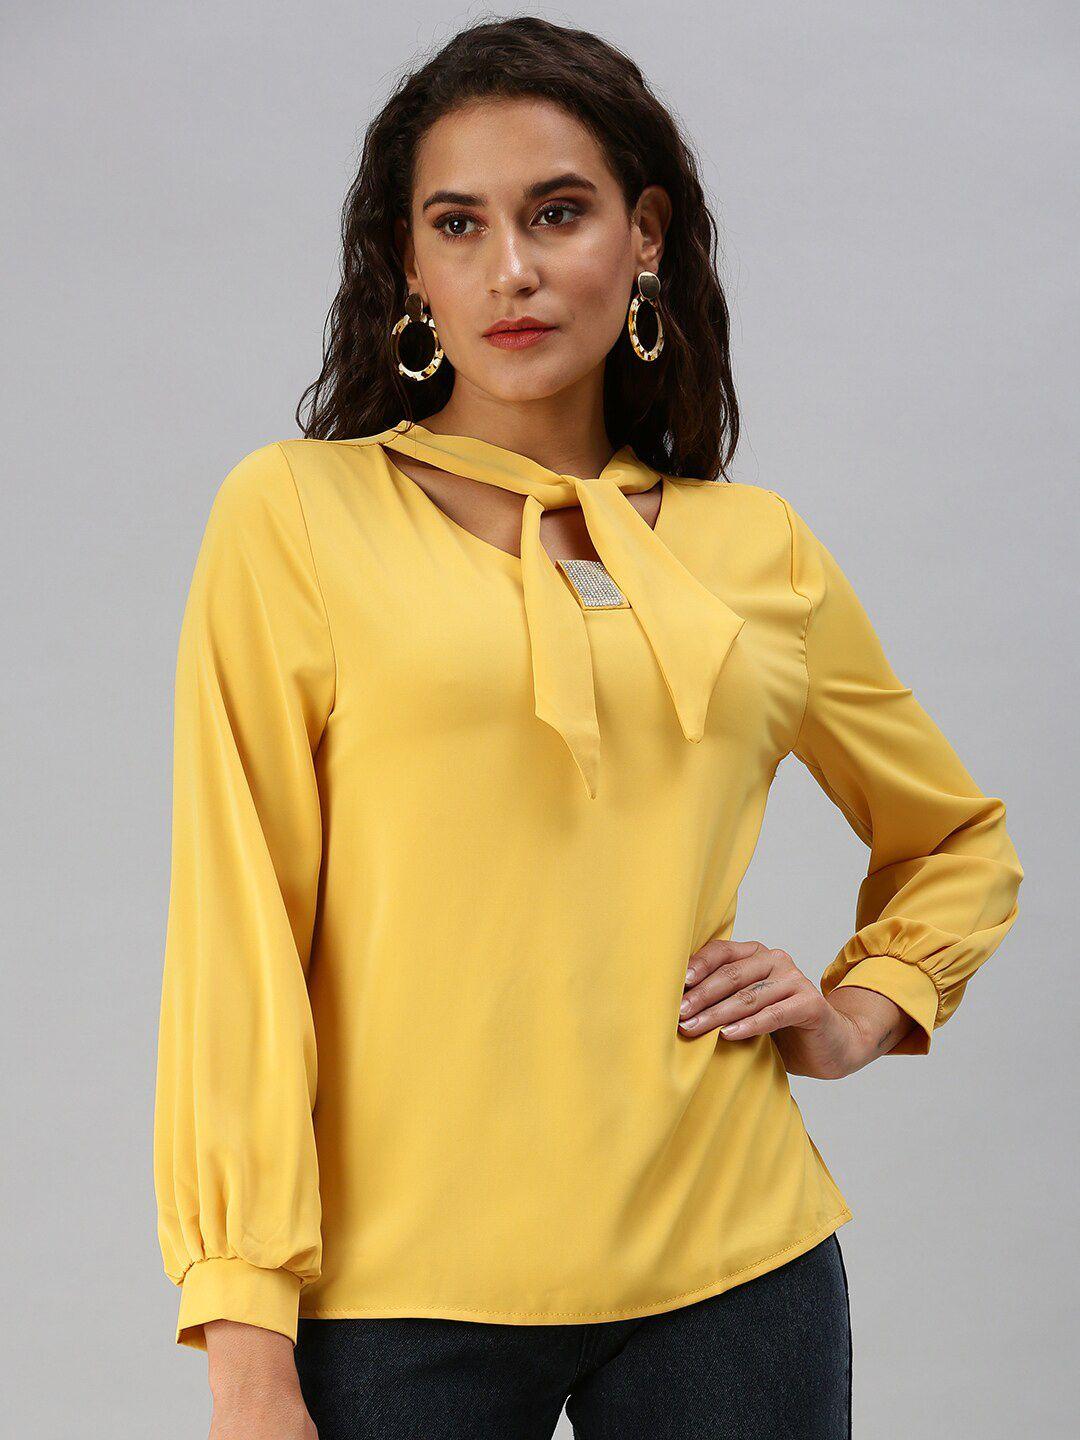 showoff cuffed sleeves tie-up neck embellished regular top